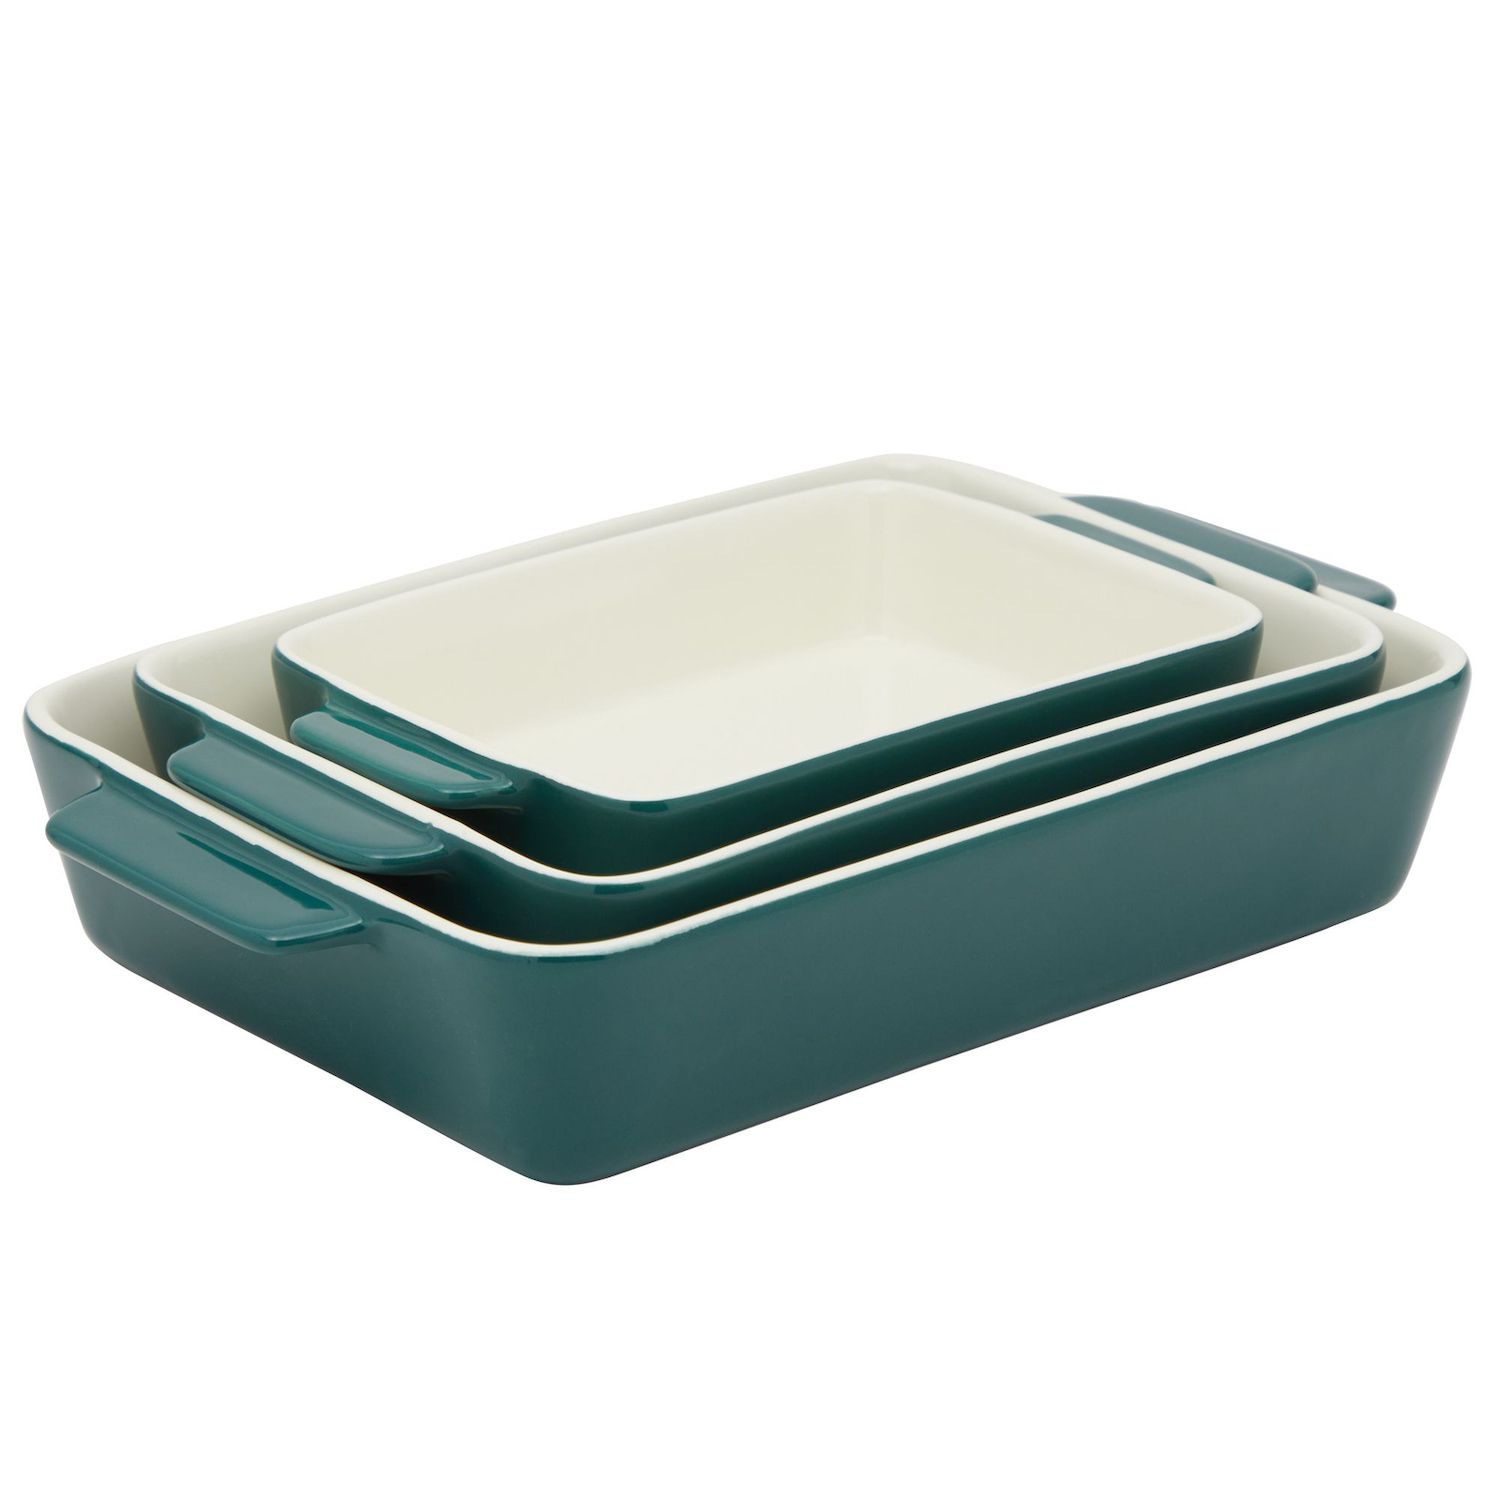 Rubbermaid Glass Baking Dishes for Oven, Casserole Dish Bakeware, DuraLite  3-Piece Set, White (No Lids)